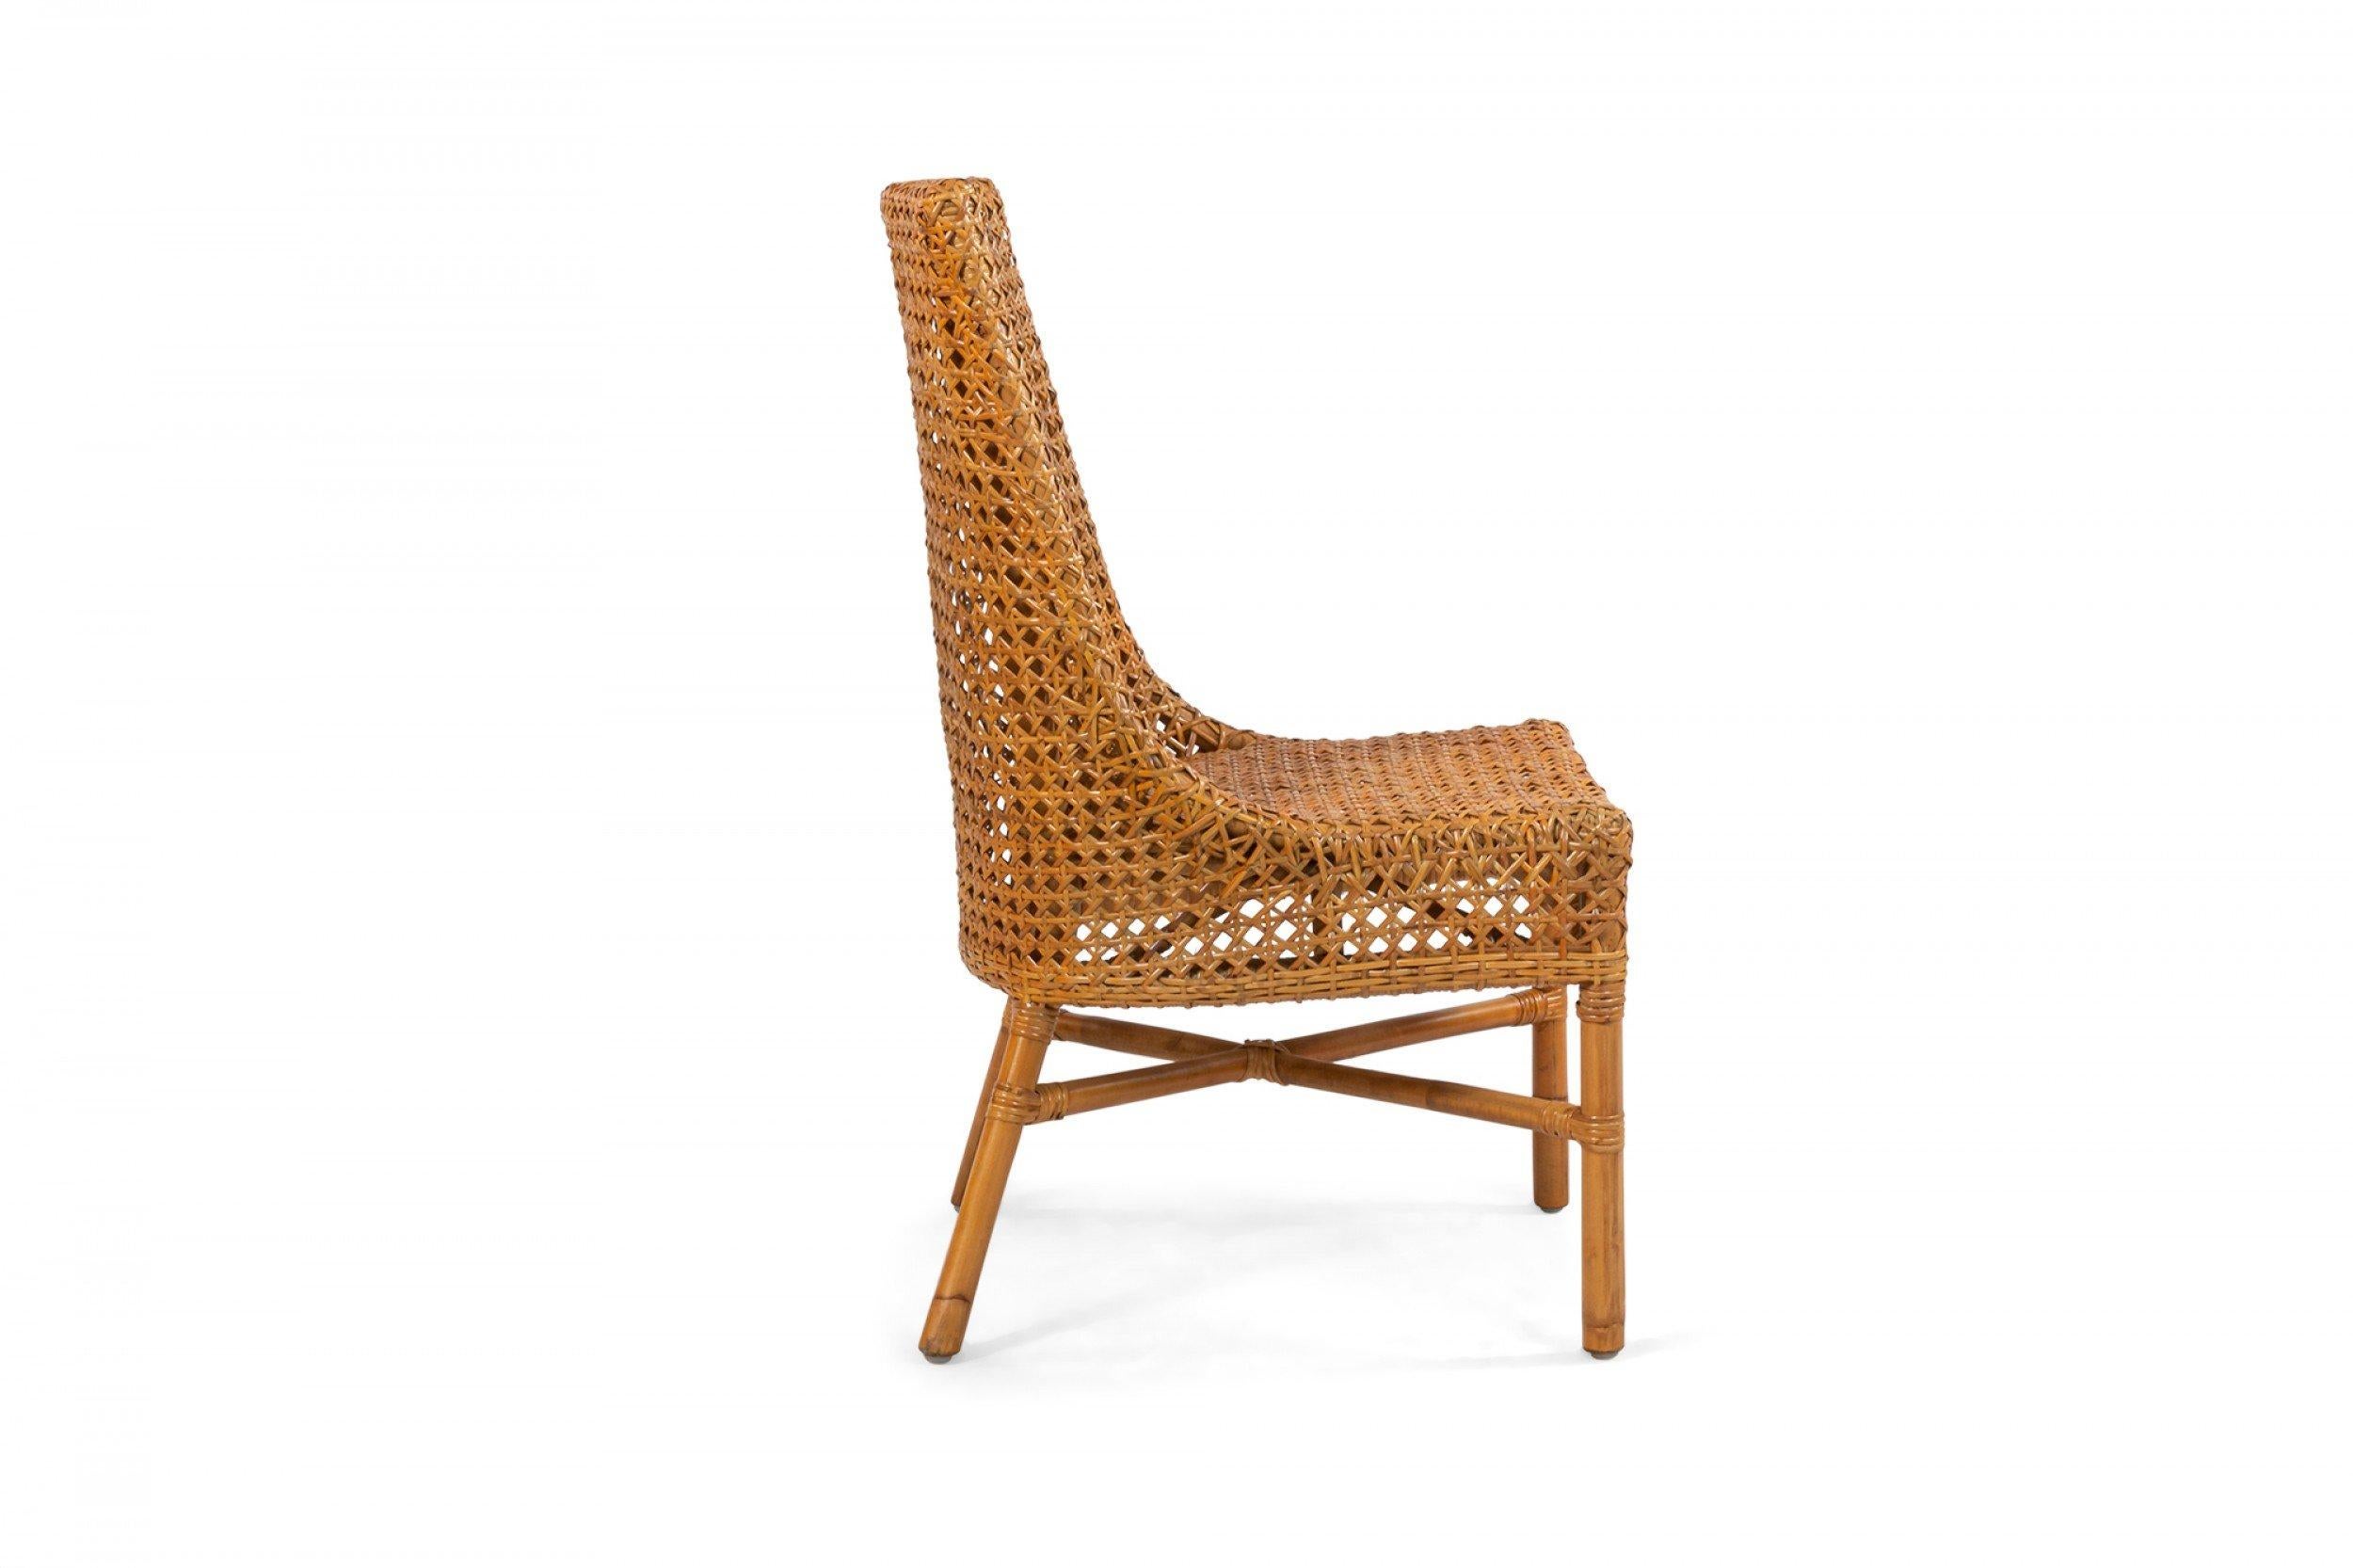 Contemporary Wicker Side Chairs im Zustand „Gut“ im Angebot in New York, NY